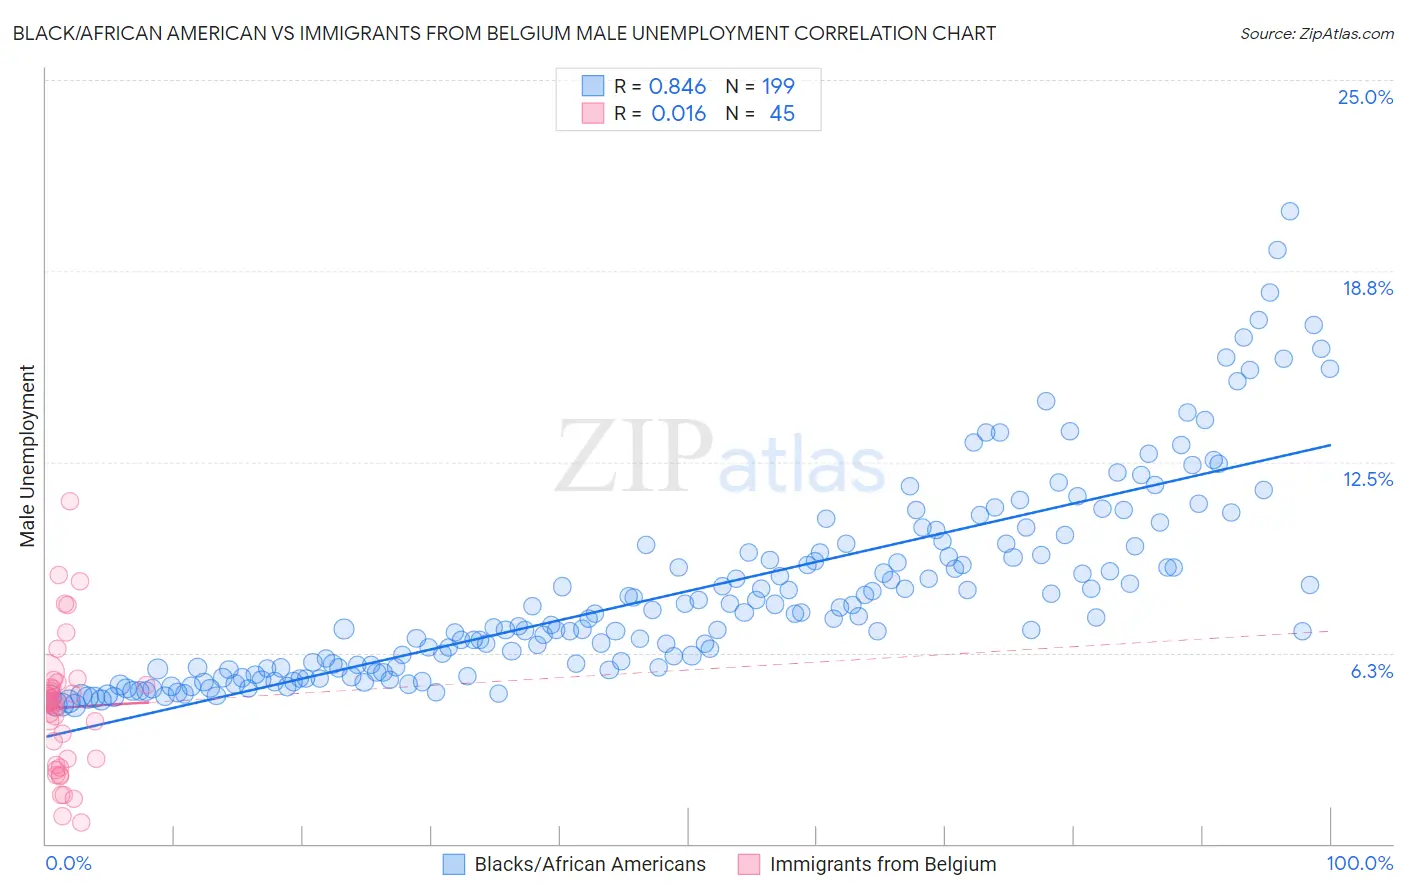 Black/African American vs Immigrants from Belgium Male Unemployment